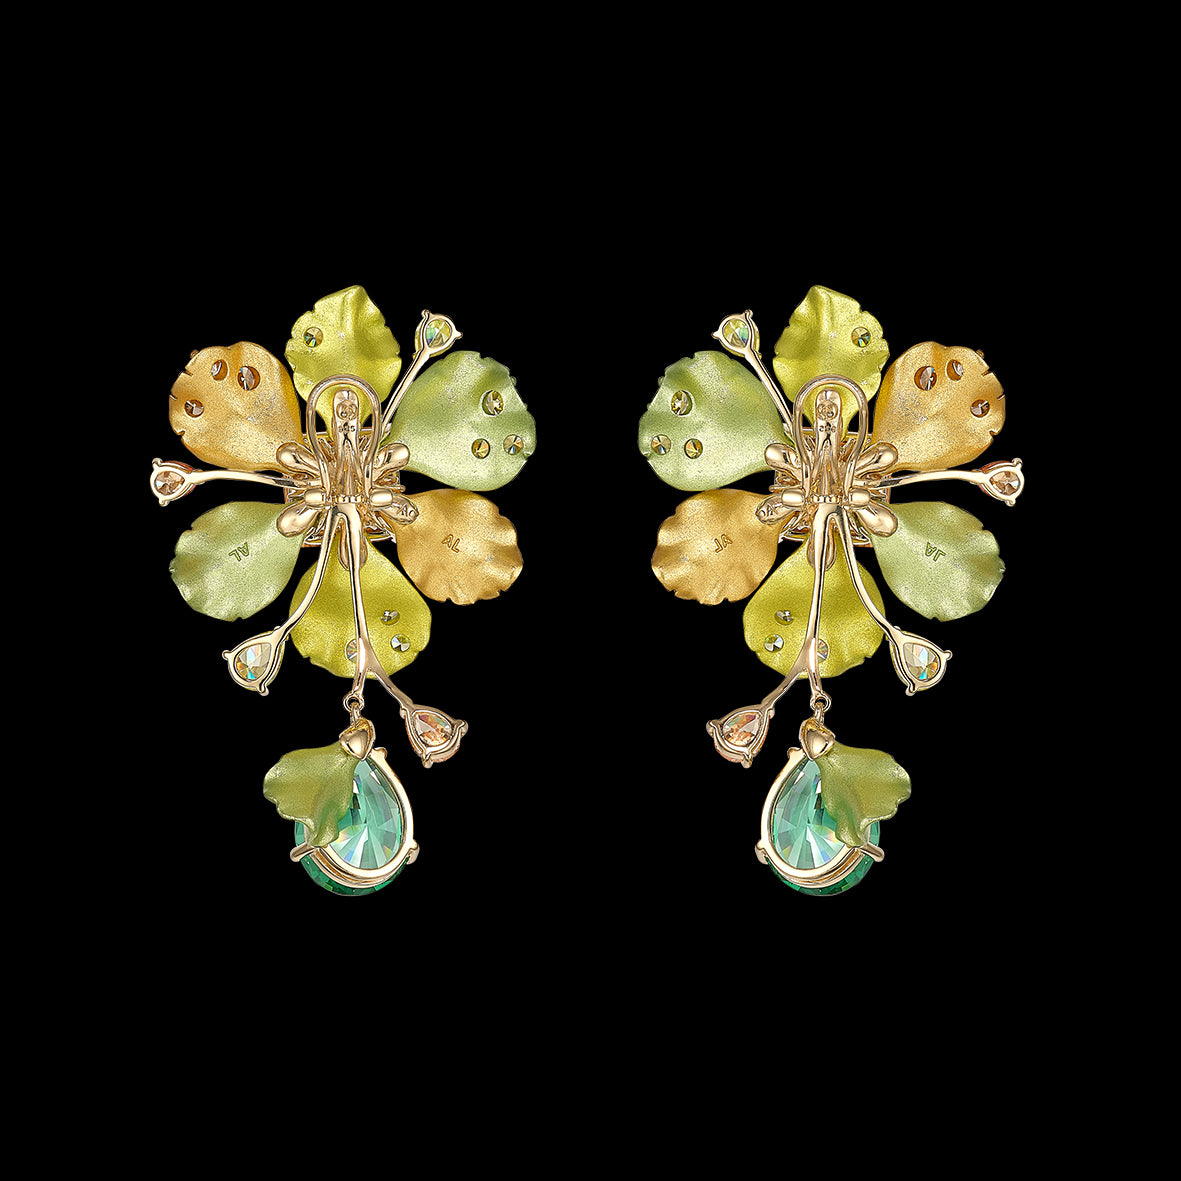 Citrus Neptuna Earrings, Earring, Anabela Chan Joaillerie - Fine jewelry with laboratory grown and created gemstones hand-crafted in the United Kingdom. Anabela Chan Joaillerie is the first fine jewellery brand in the world to champion laboratory-grown and created gemstones with high jewellery design, artisanal craftsmanship and a focus on ethical and sustainable innovations.